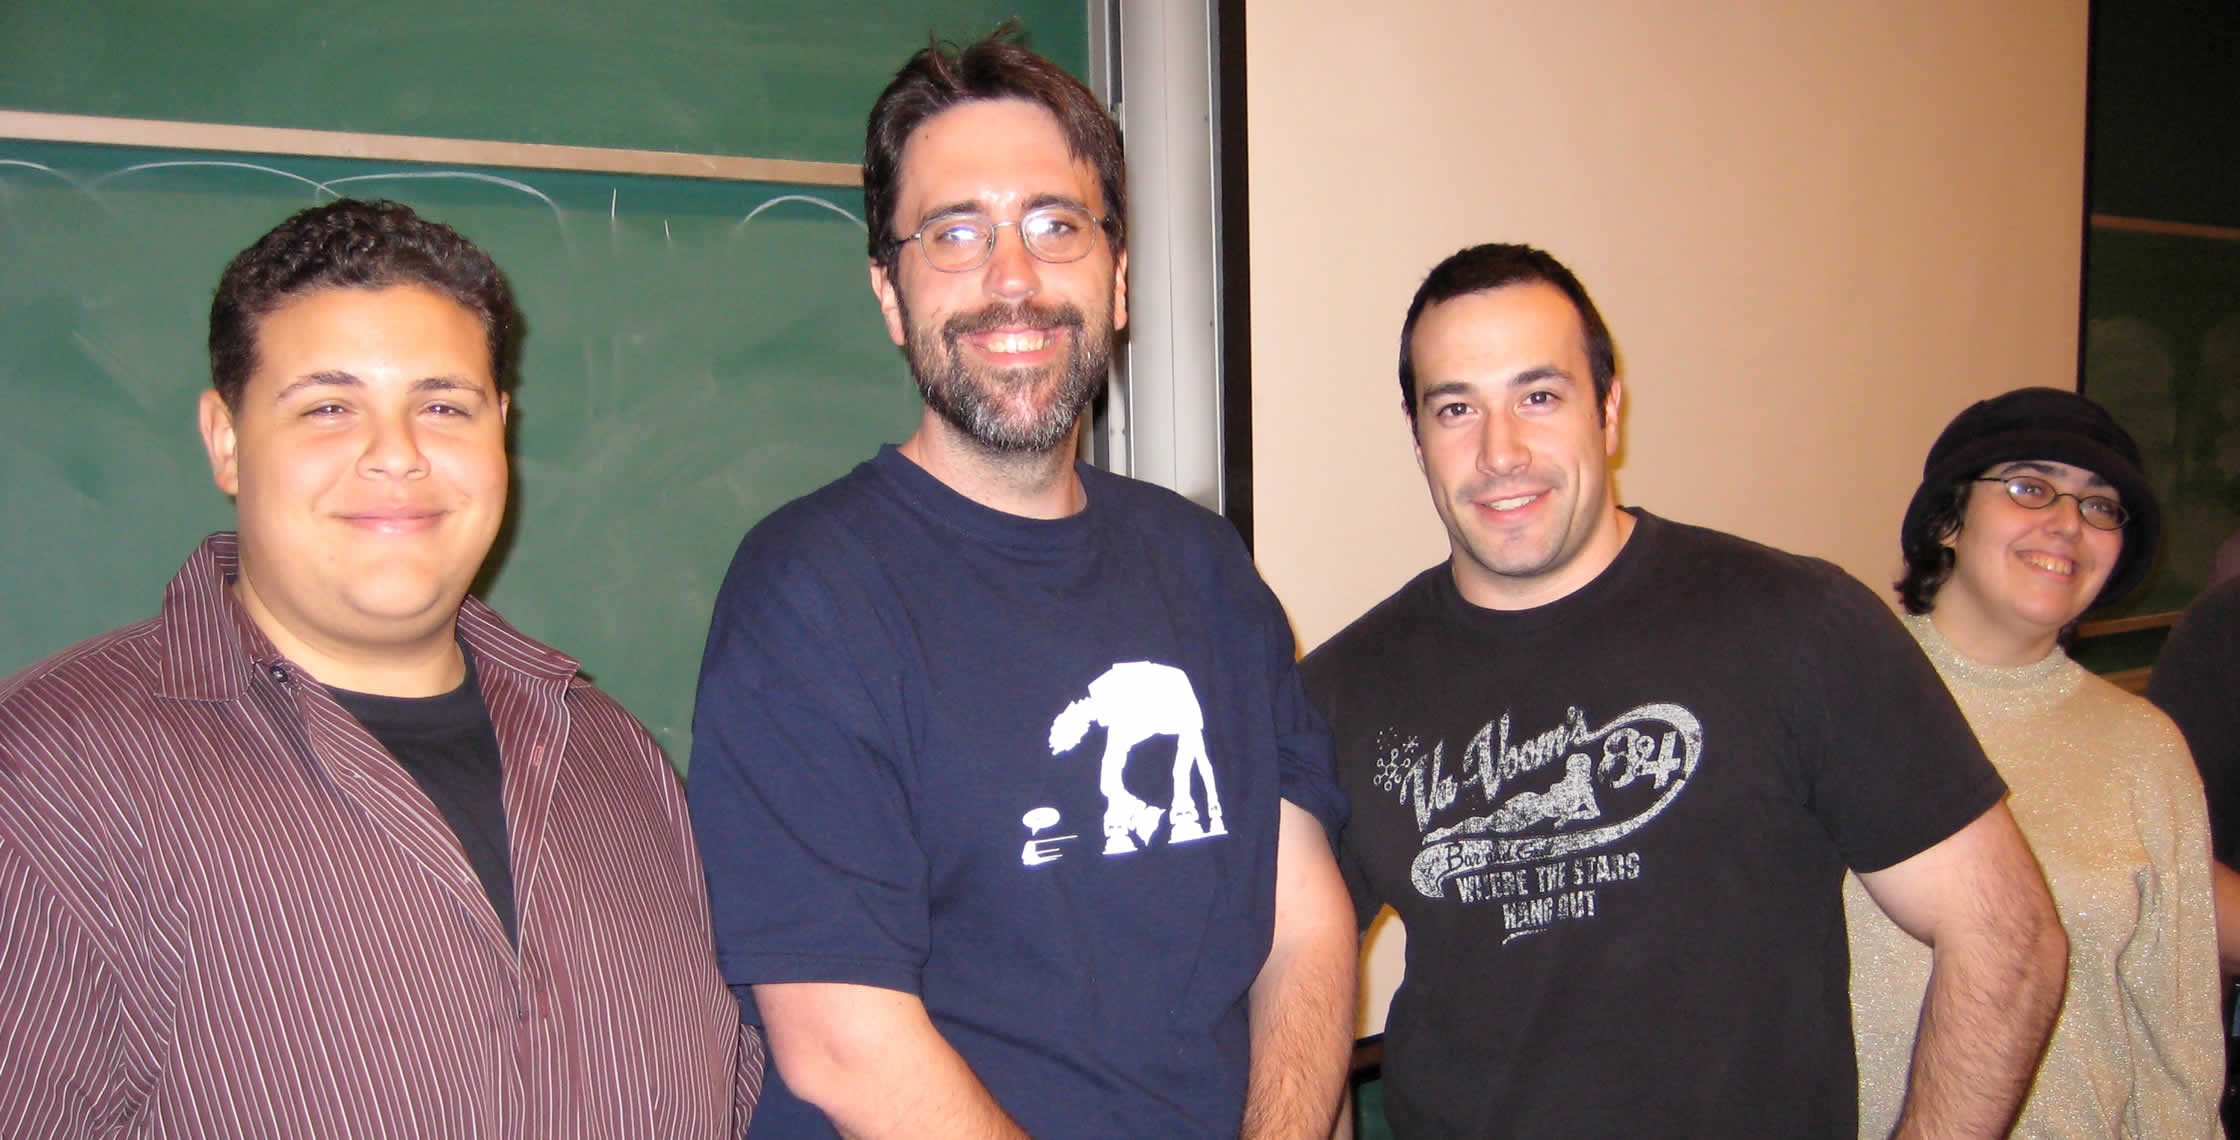 Ben Nadel at the New York ColdFusion User Group (Feb. 2008) with: Clark Valberg, Ray Camden, and Judith Dinowitz